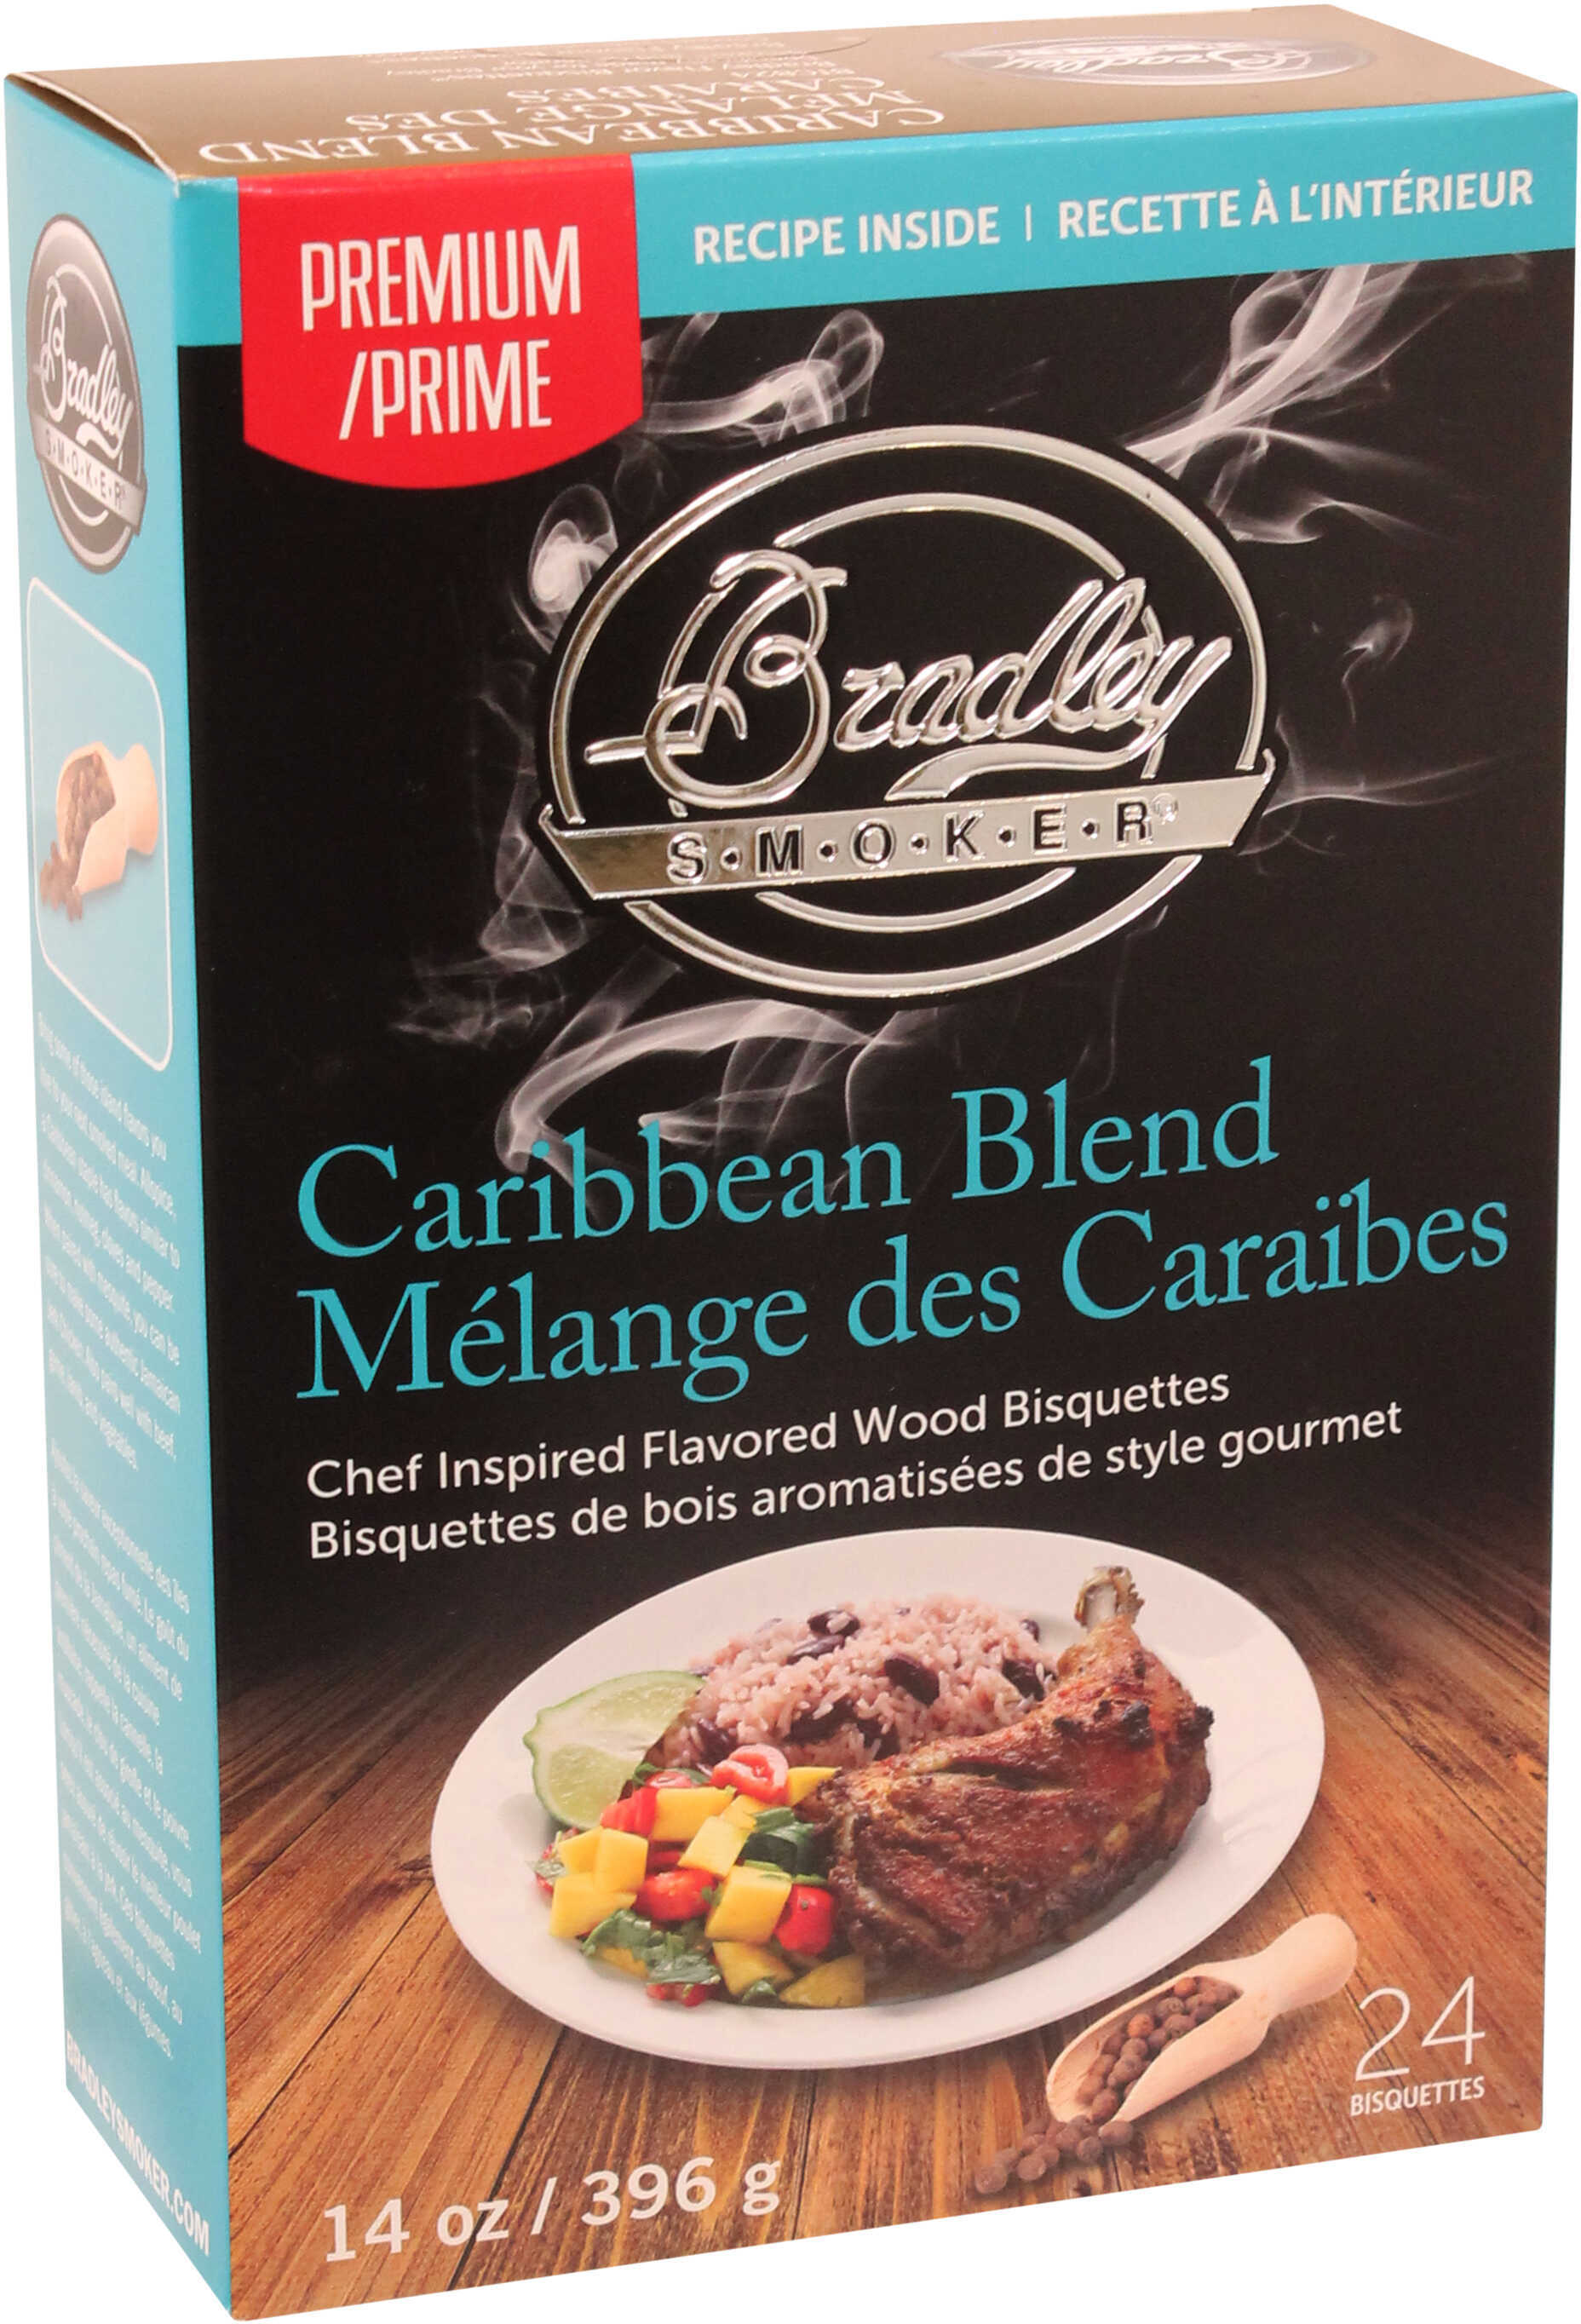 Bradley Smoker Caribbean BISQUETTES 24 Pack